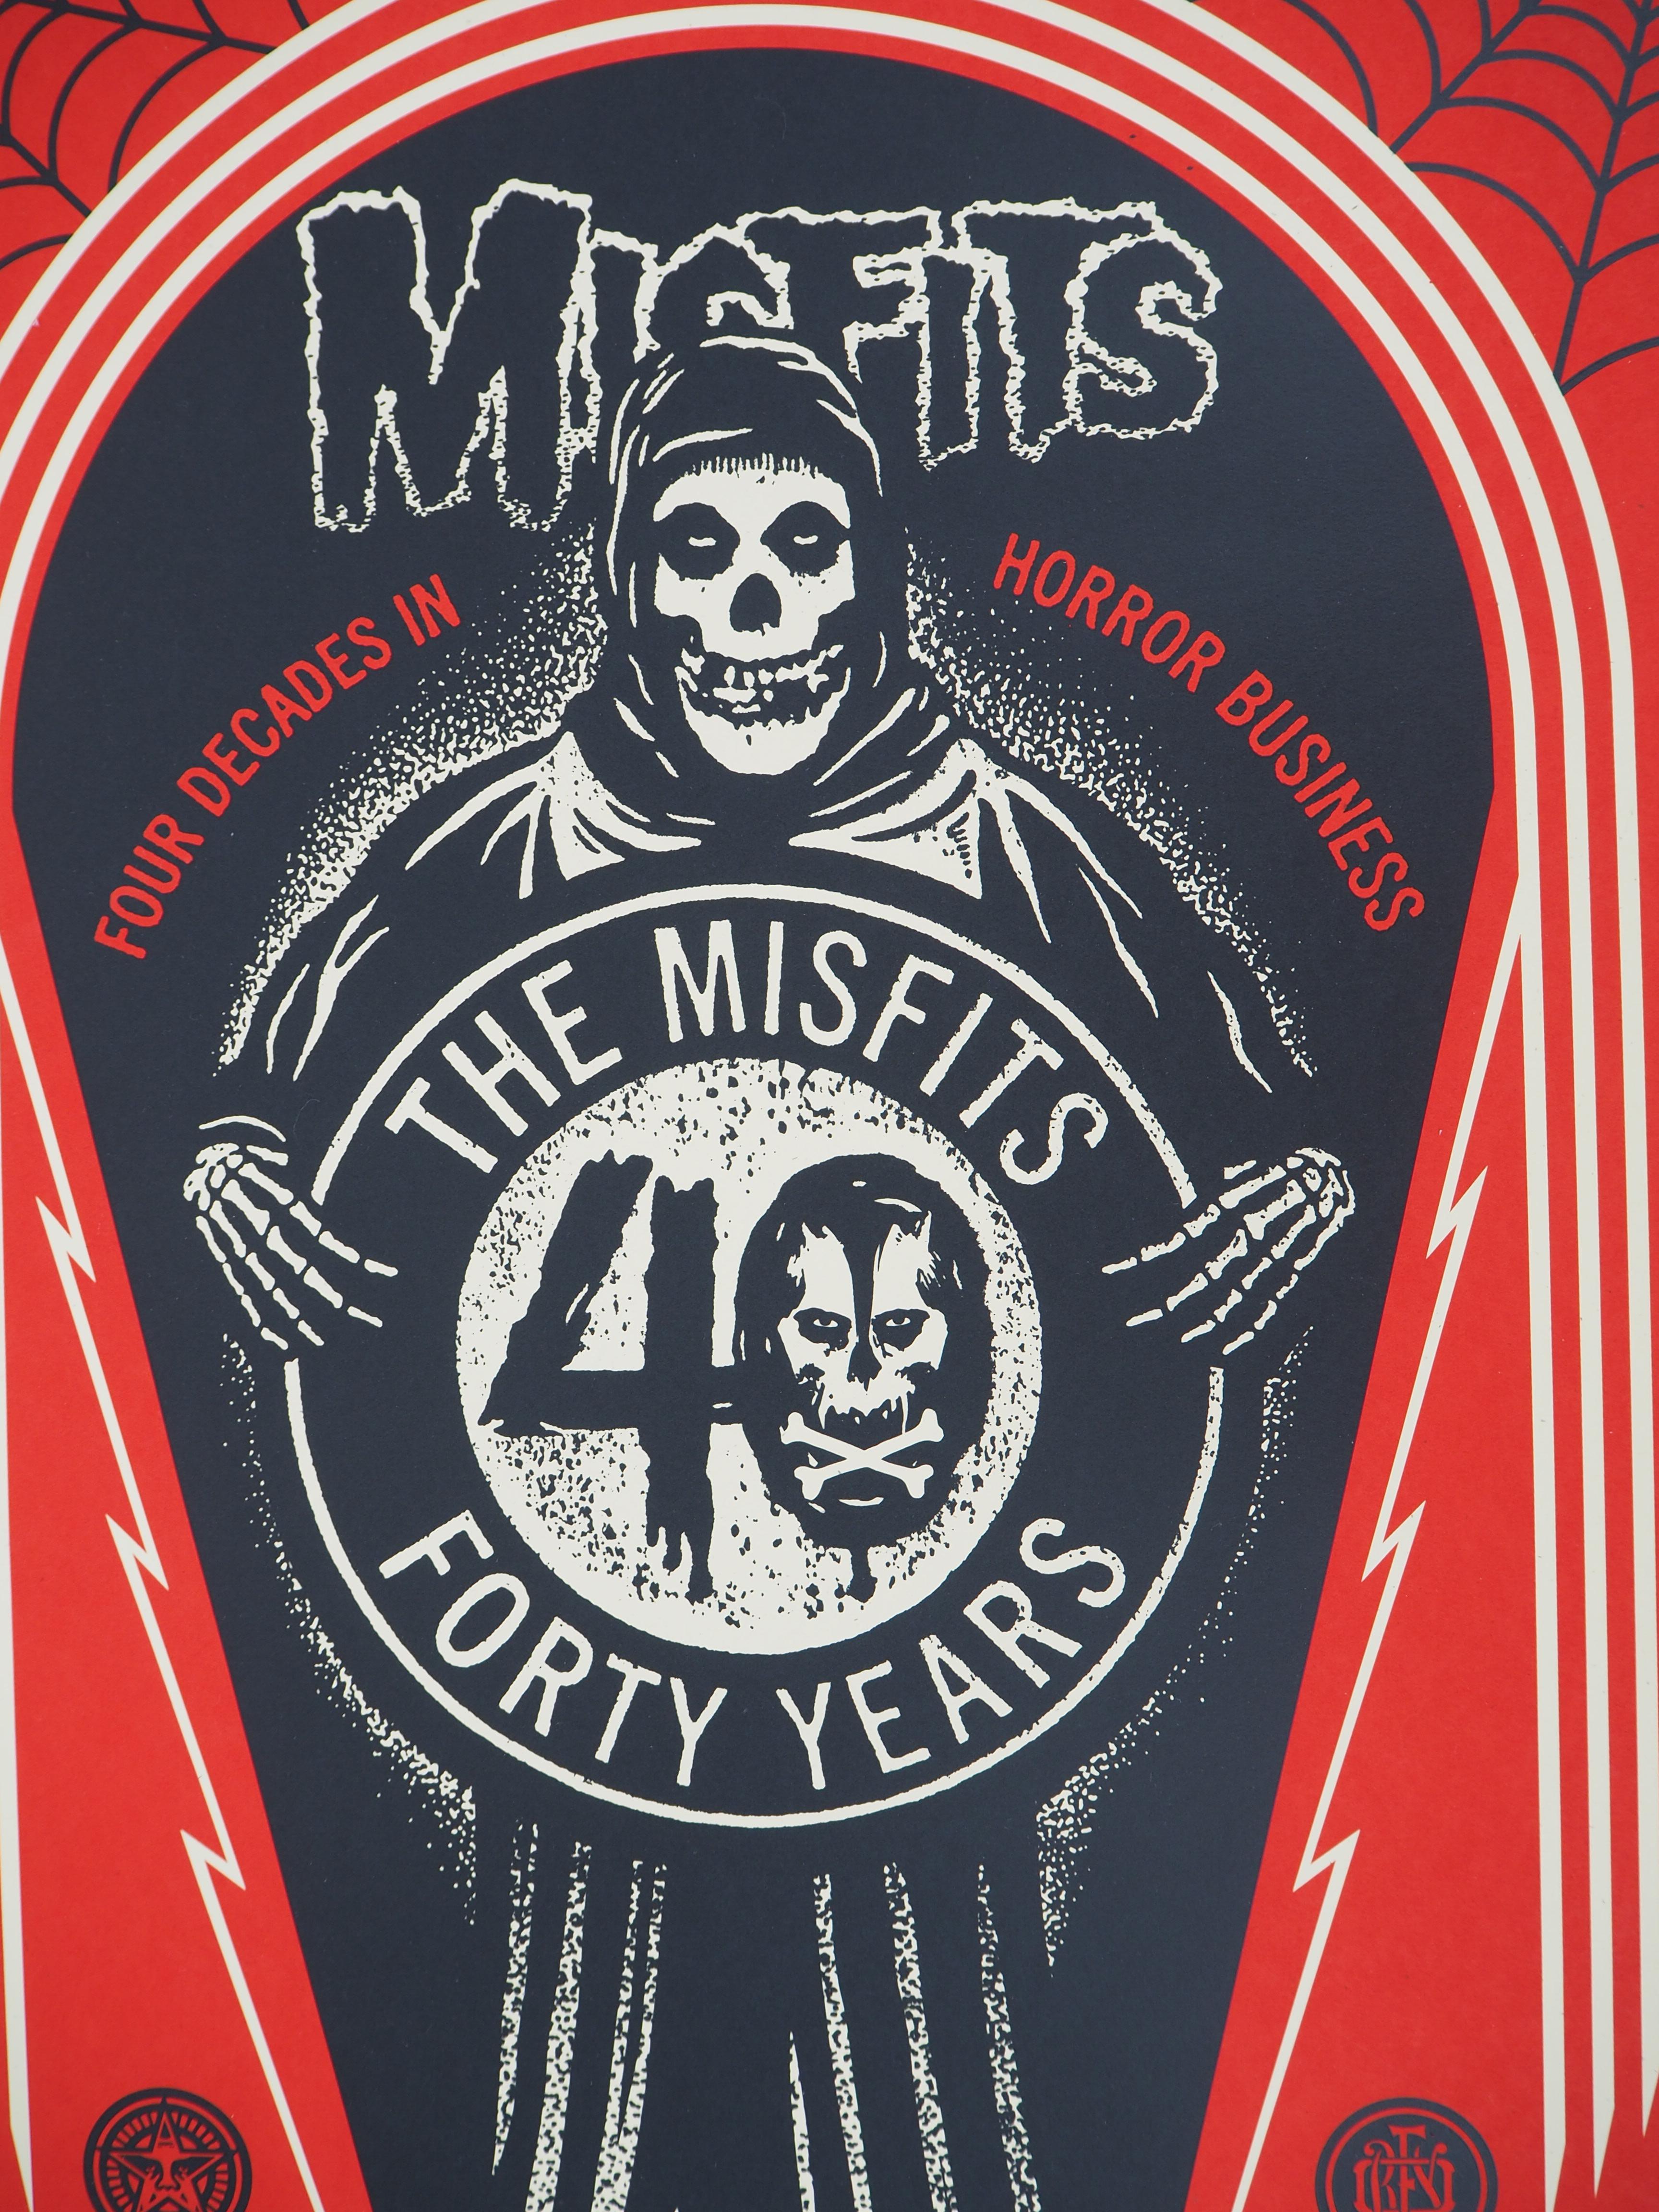 Misfits, For Decades in Horror Business - Handsigned and Numbered Print - Black Figurative Print by Shepard Fairey